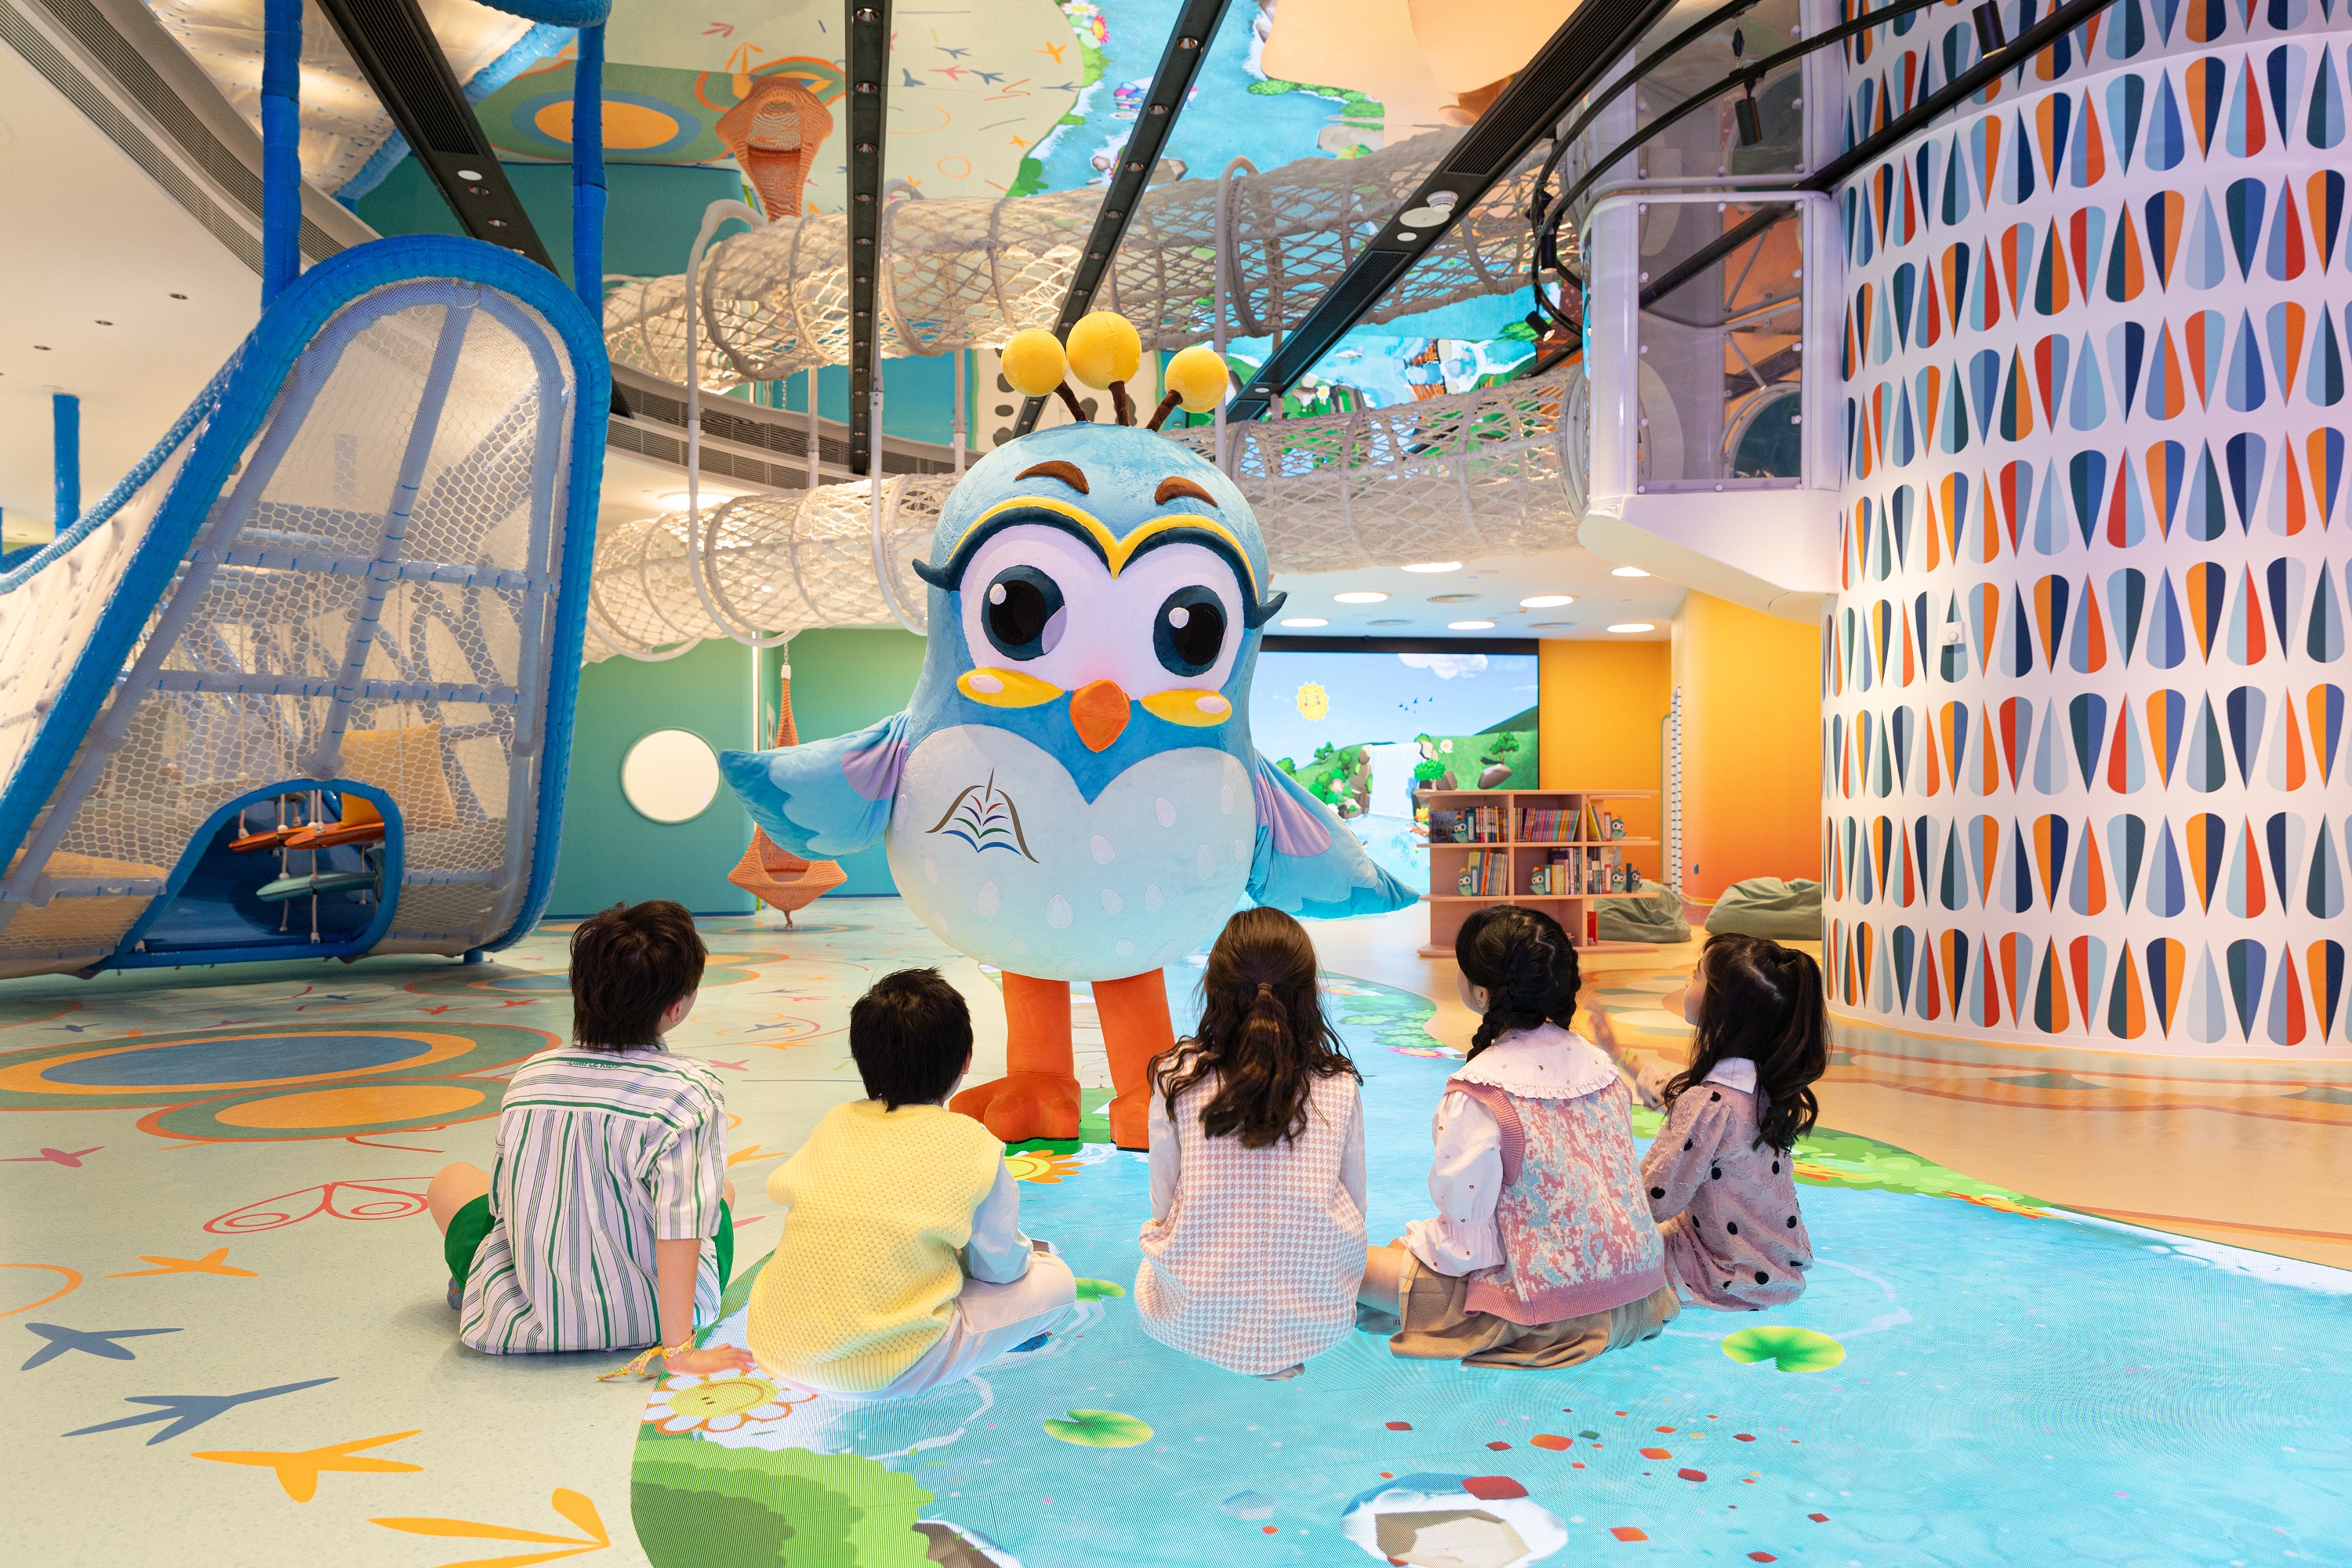 Wavey, the peacock mascot of Galaxy Kidz, is beloved by children for its beautiful appearance and adorable personality.